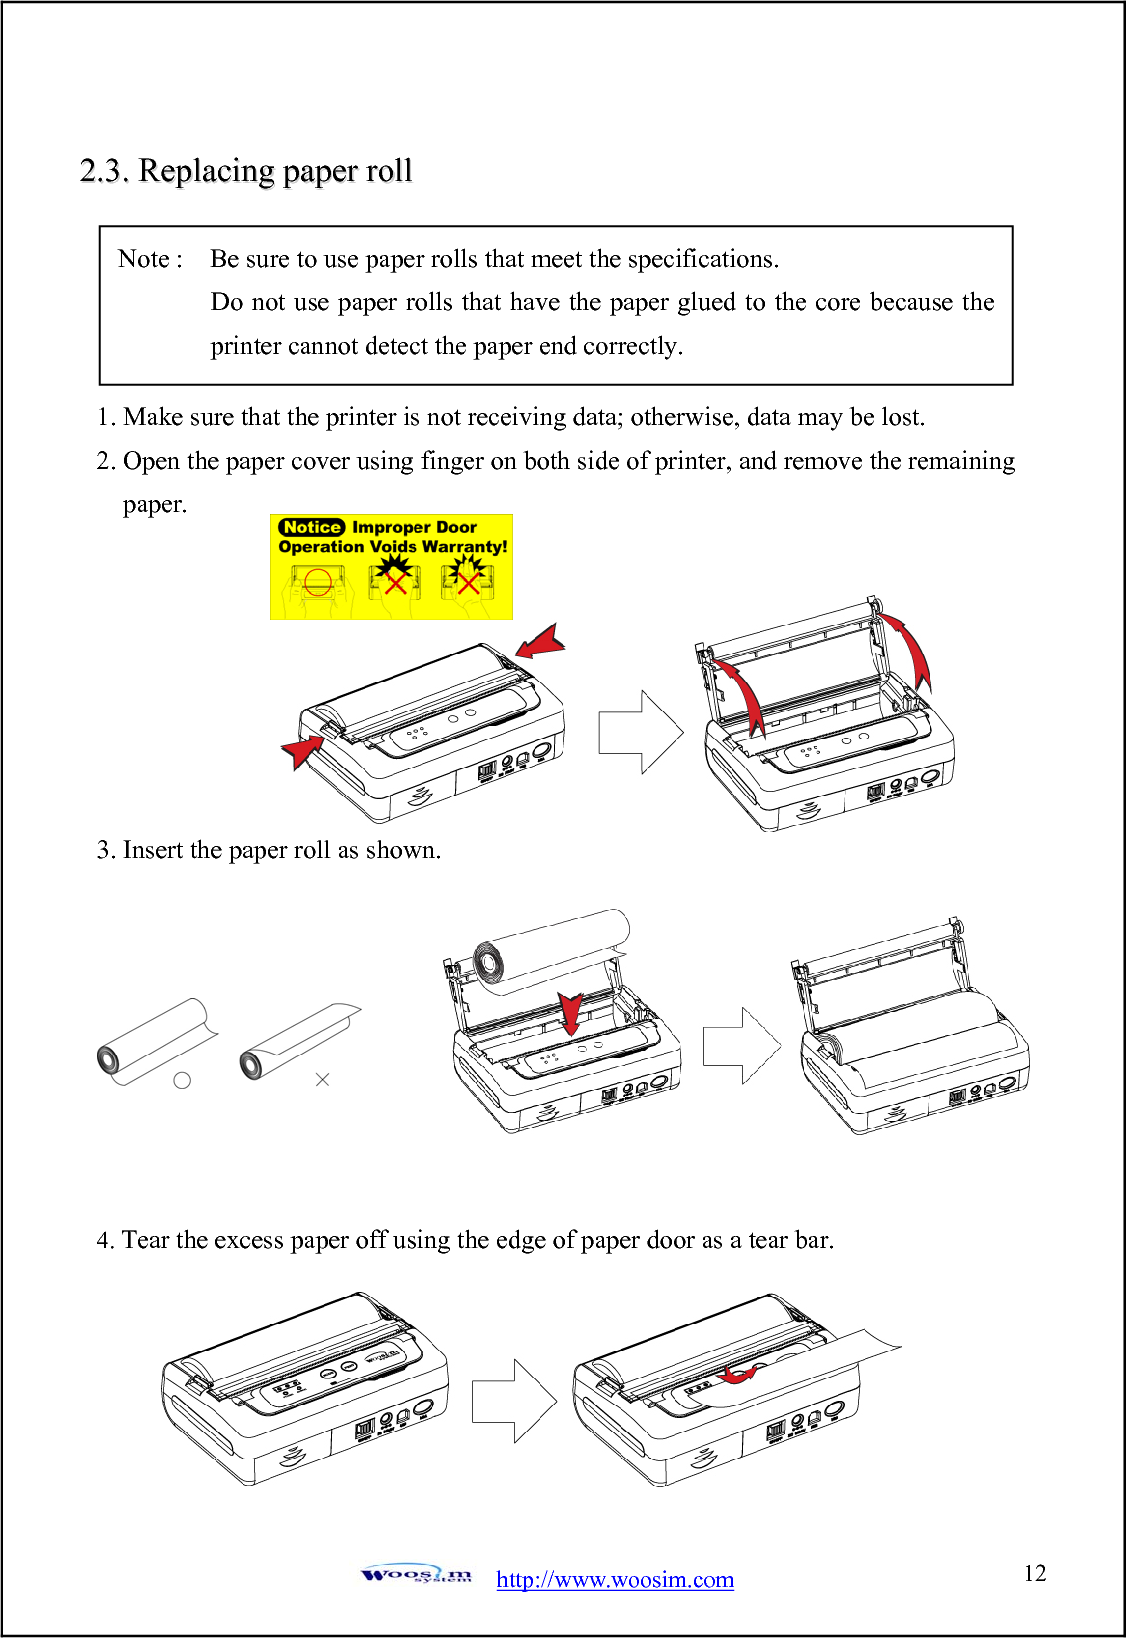  http://www.woosim.com 1222..33..  RReeppllaacciinngg  ppaappeerr  rroollll                                    1. Make sure that the printer is not receiving data; otherwise, data may be lost. 2. Open the paper cover using finger on both side of printer, and remove the remaining paper.        3. Insert the paper roll as shown.         4. Tear the excess paper off using the edge of paper door as a tear bar.        Note :    Be sure to use paper rolls that meet the specifications.        Do not use paper rolls that have the paper glued to the core because the printer cannot detect the paper end correctly. 